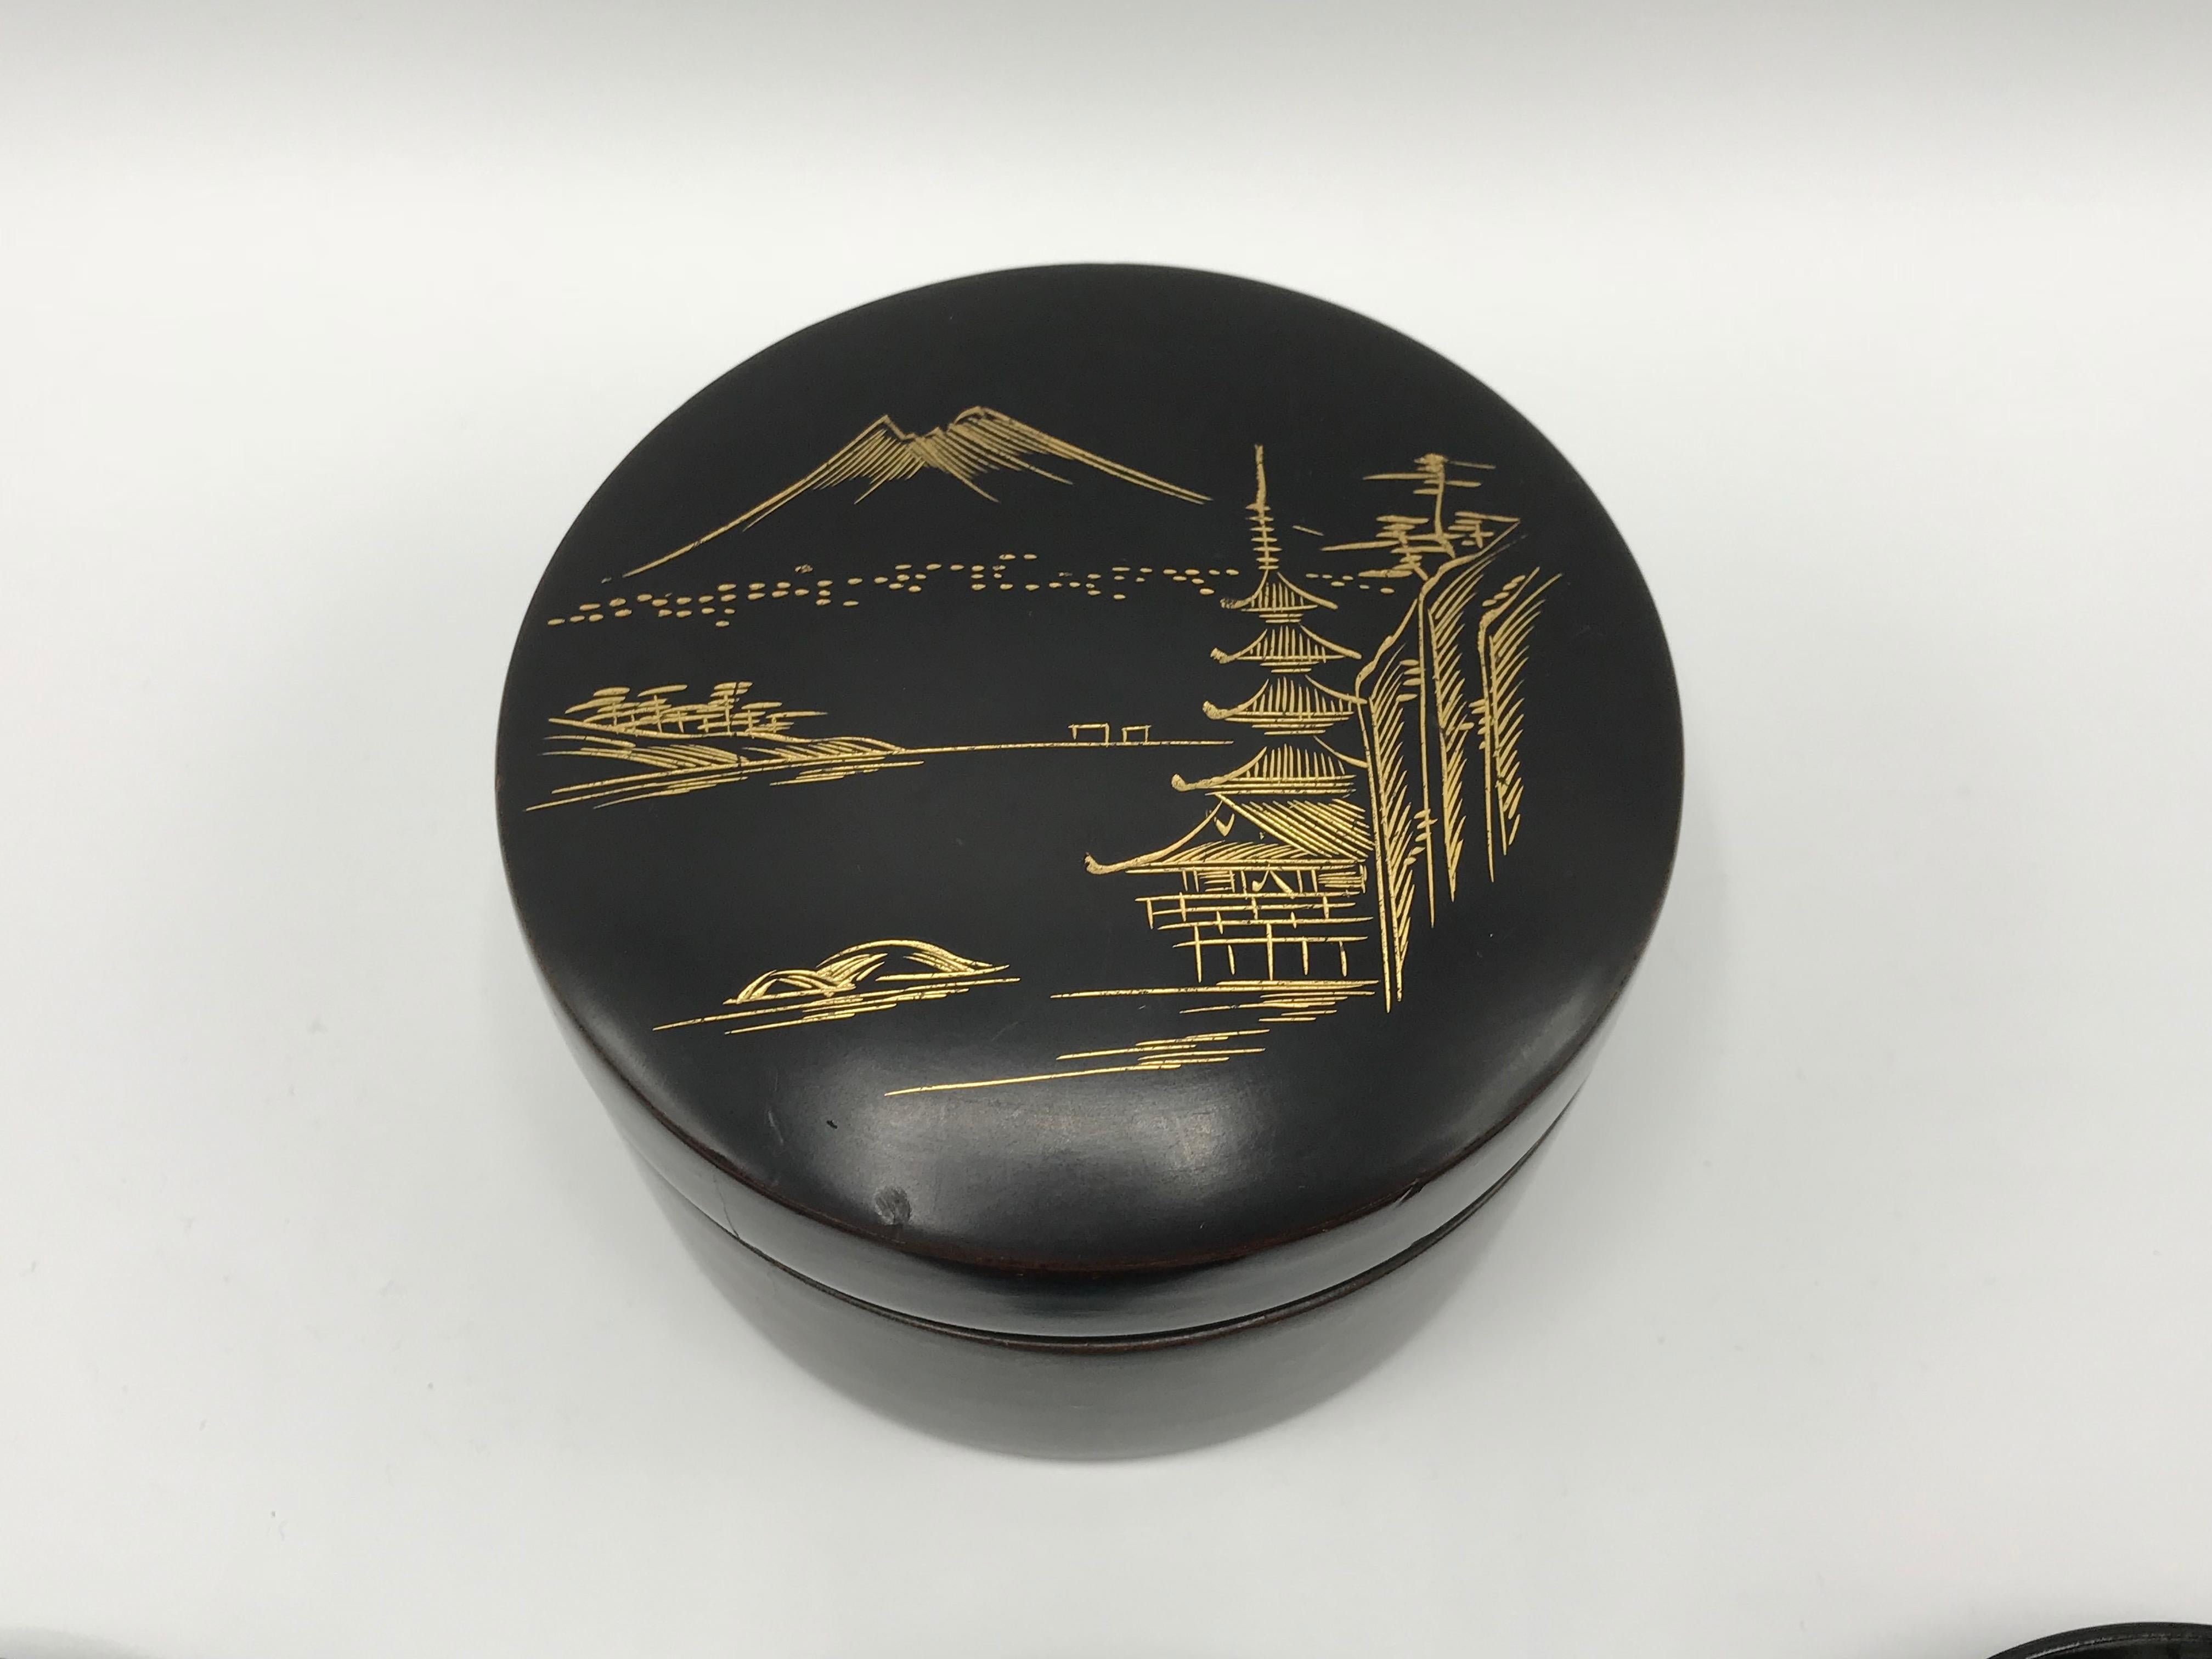 Listed is a fabulous, set of 6, 1960s black and gold lacquered coasters. The set includes a matching lidded box, where all six of the coasters stack inside. 

Measures: Box 2.25in height x 3.75in diameter
Coasters 0.25in height x 3.25in diameter.